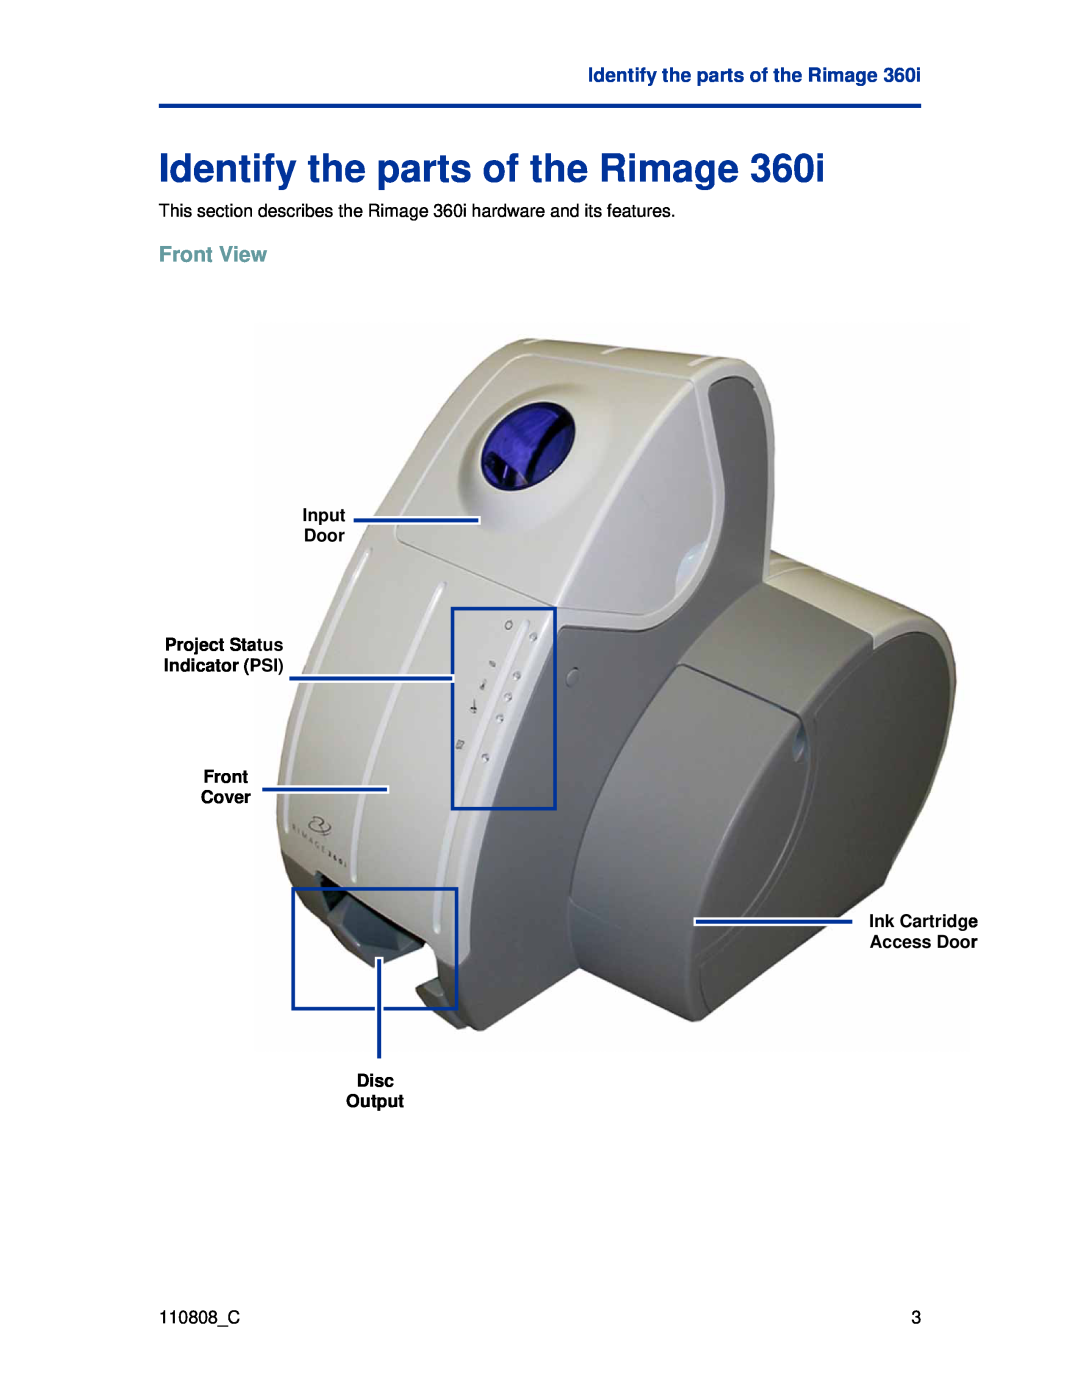 Rimage 360i manual Identify the parts of the Rimage, Front View 